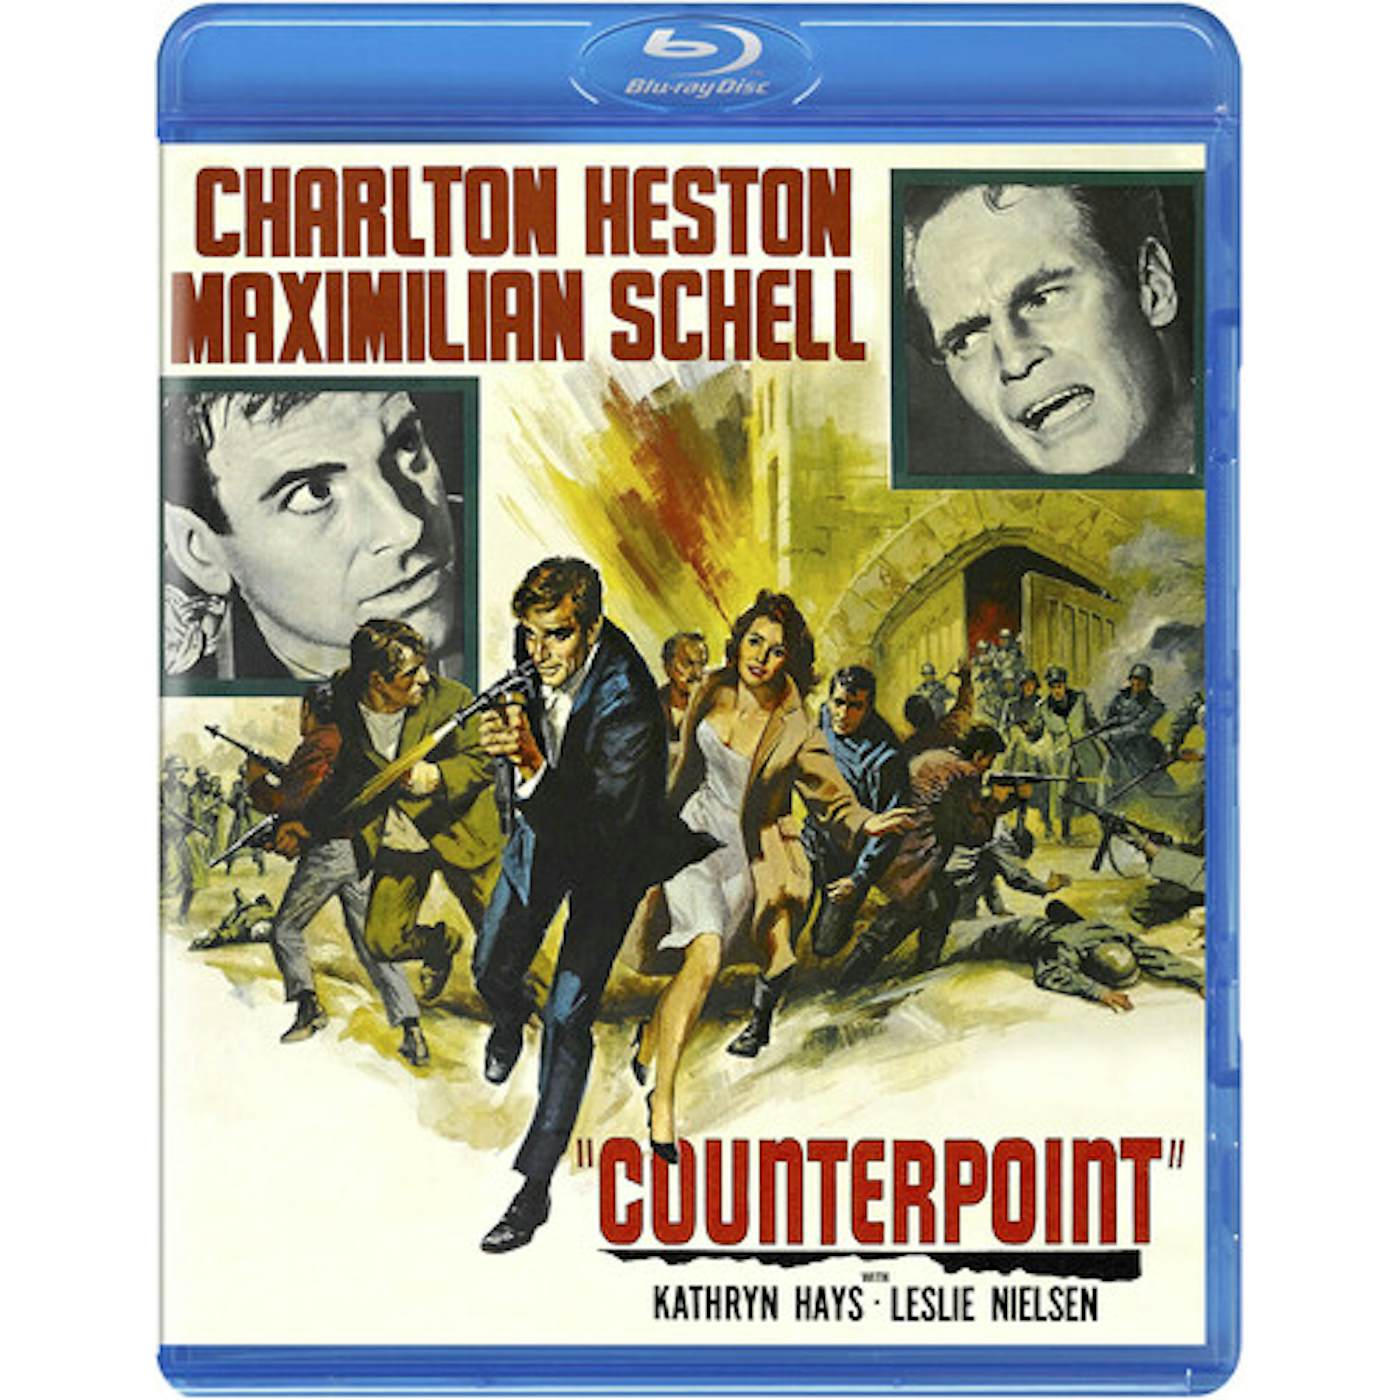 COUNTERPOINT (1967) Blu-ray